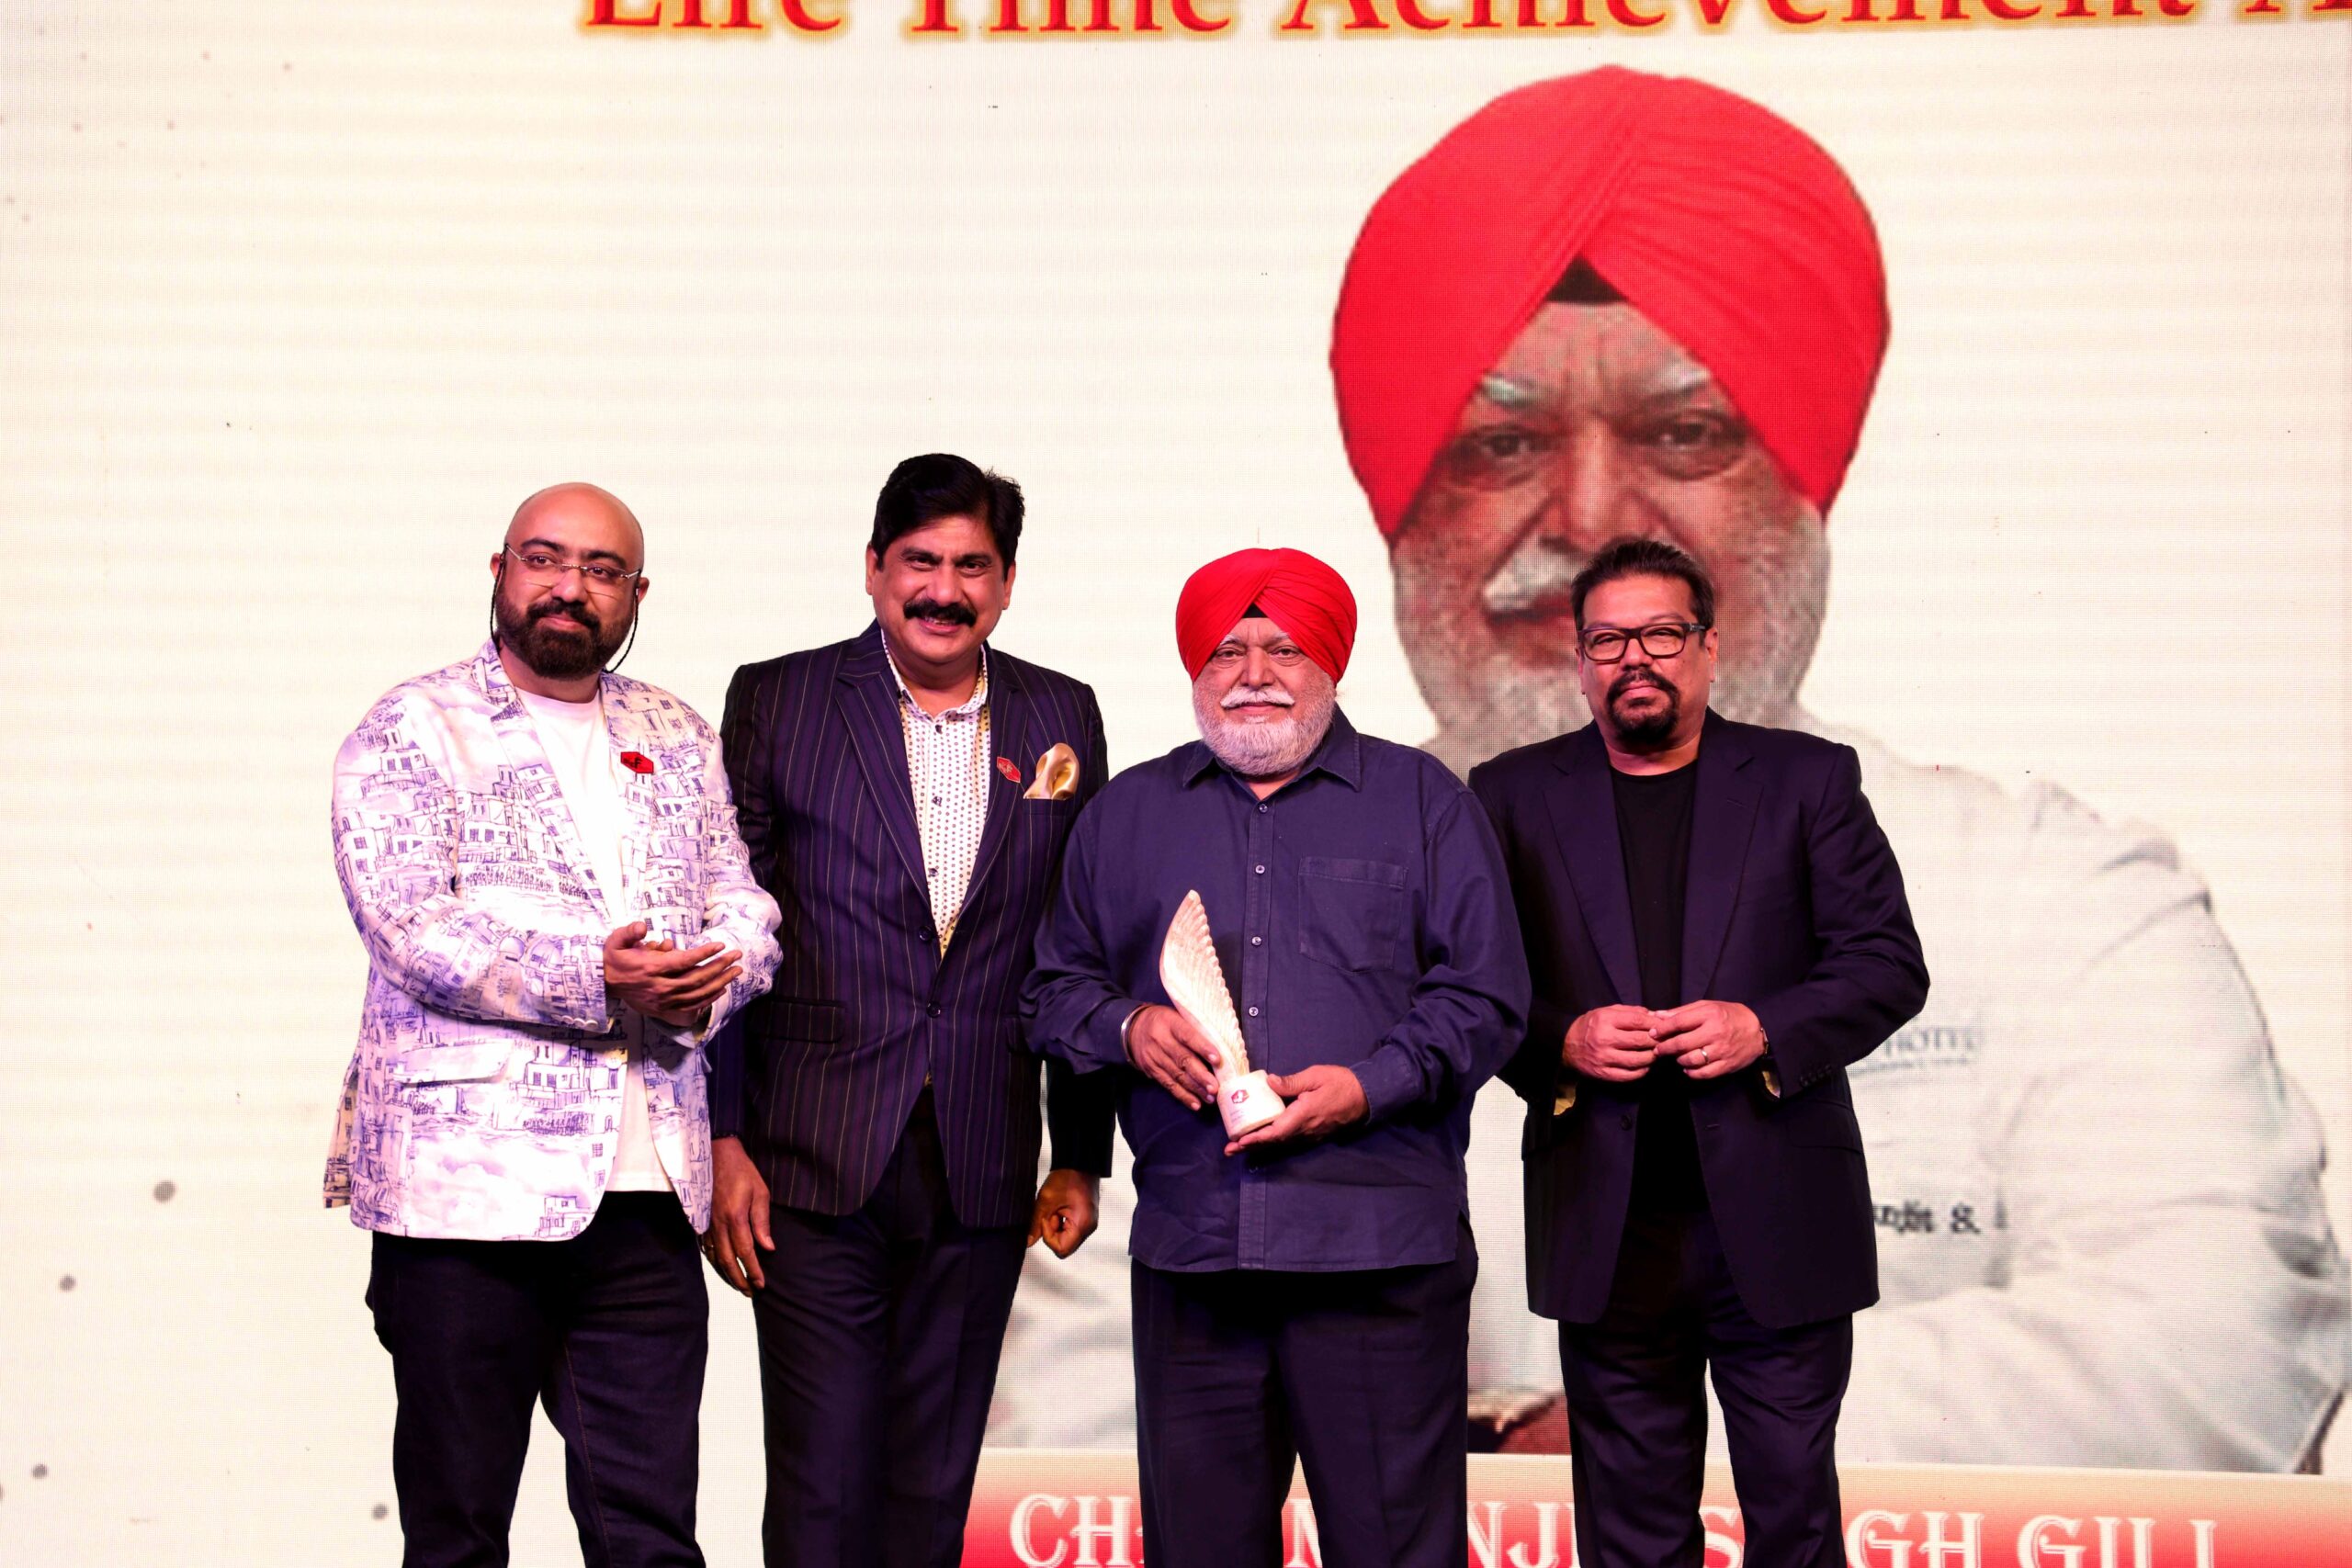 The 9th edition of ‘Big F Awards’ marks the celebration of Gurgaon’s culinary marvel